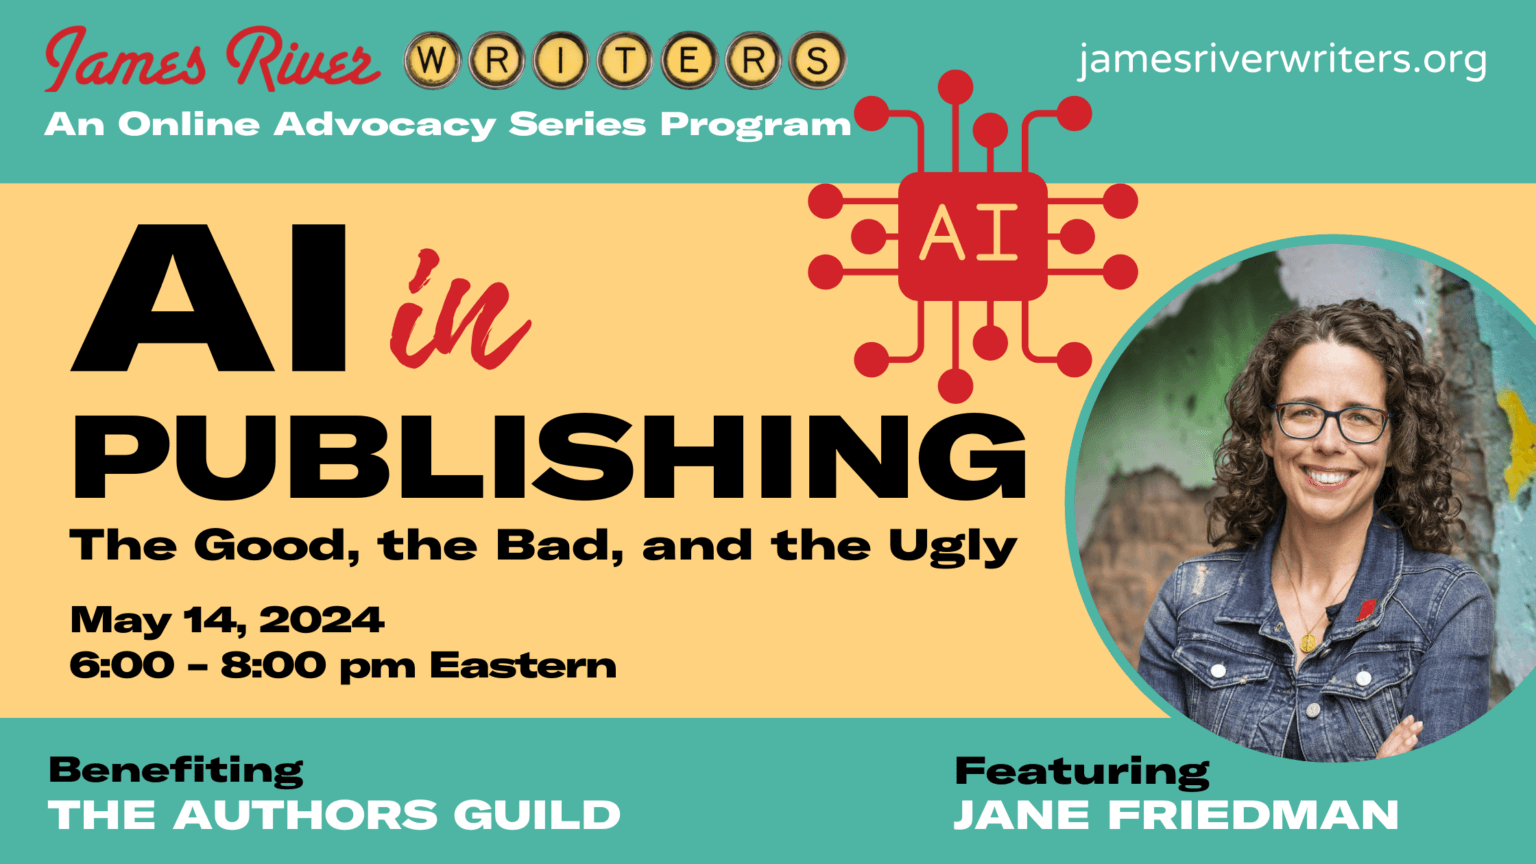 AI in Publishing: The Good, the Bad, and the Ugly featuring Jane Friedman. $5 webinar hosted by James River Writers. Tuesday, May 14, 2024. 6 p.m. to 8 p.m. Eastern.